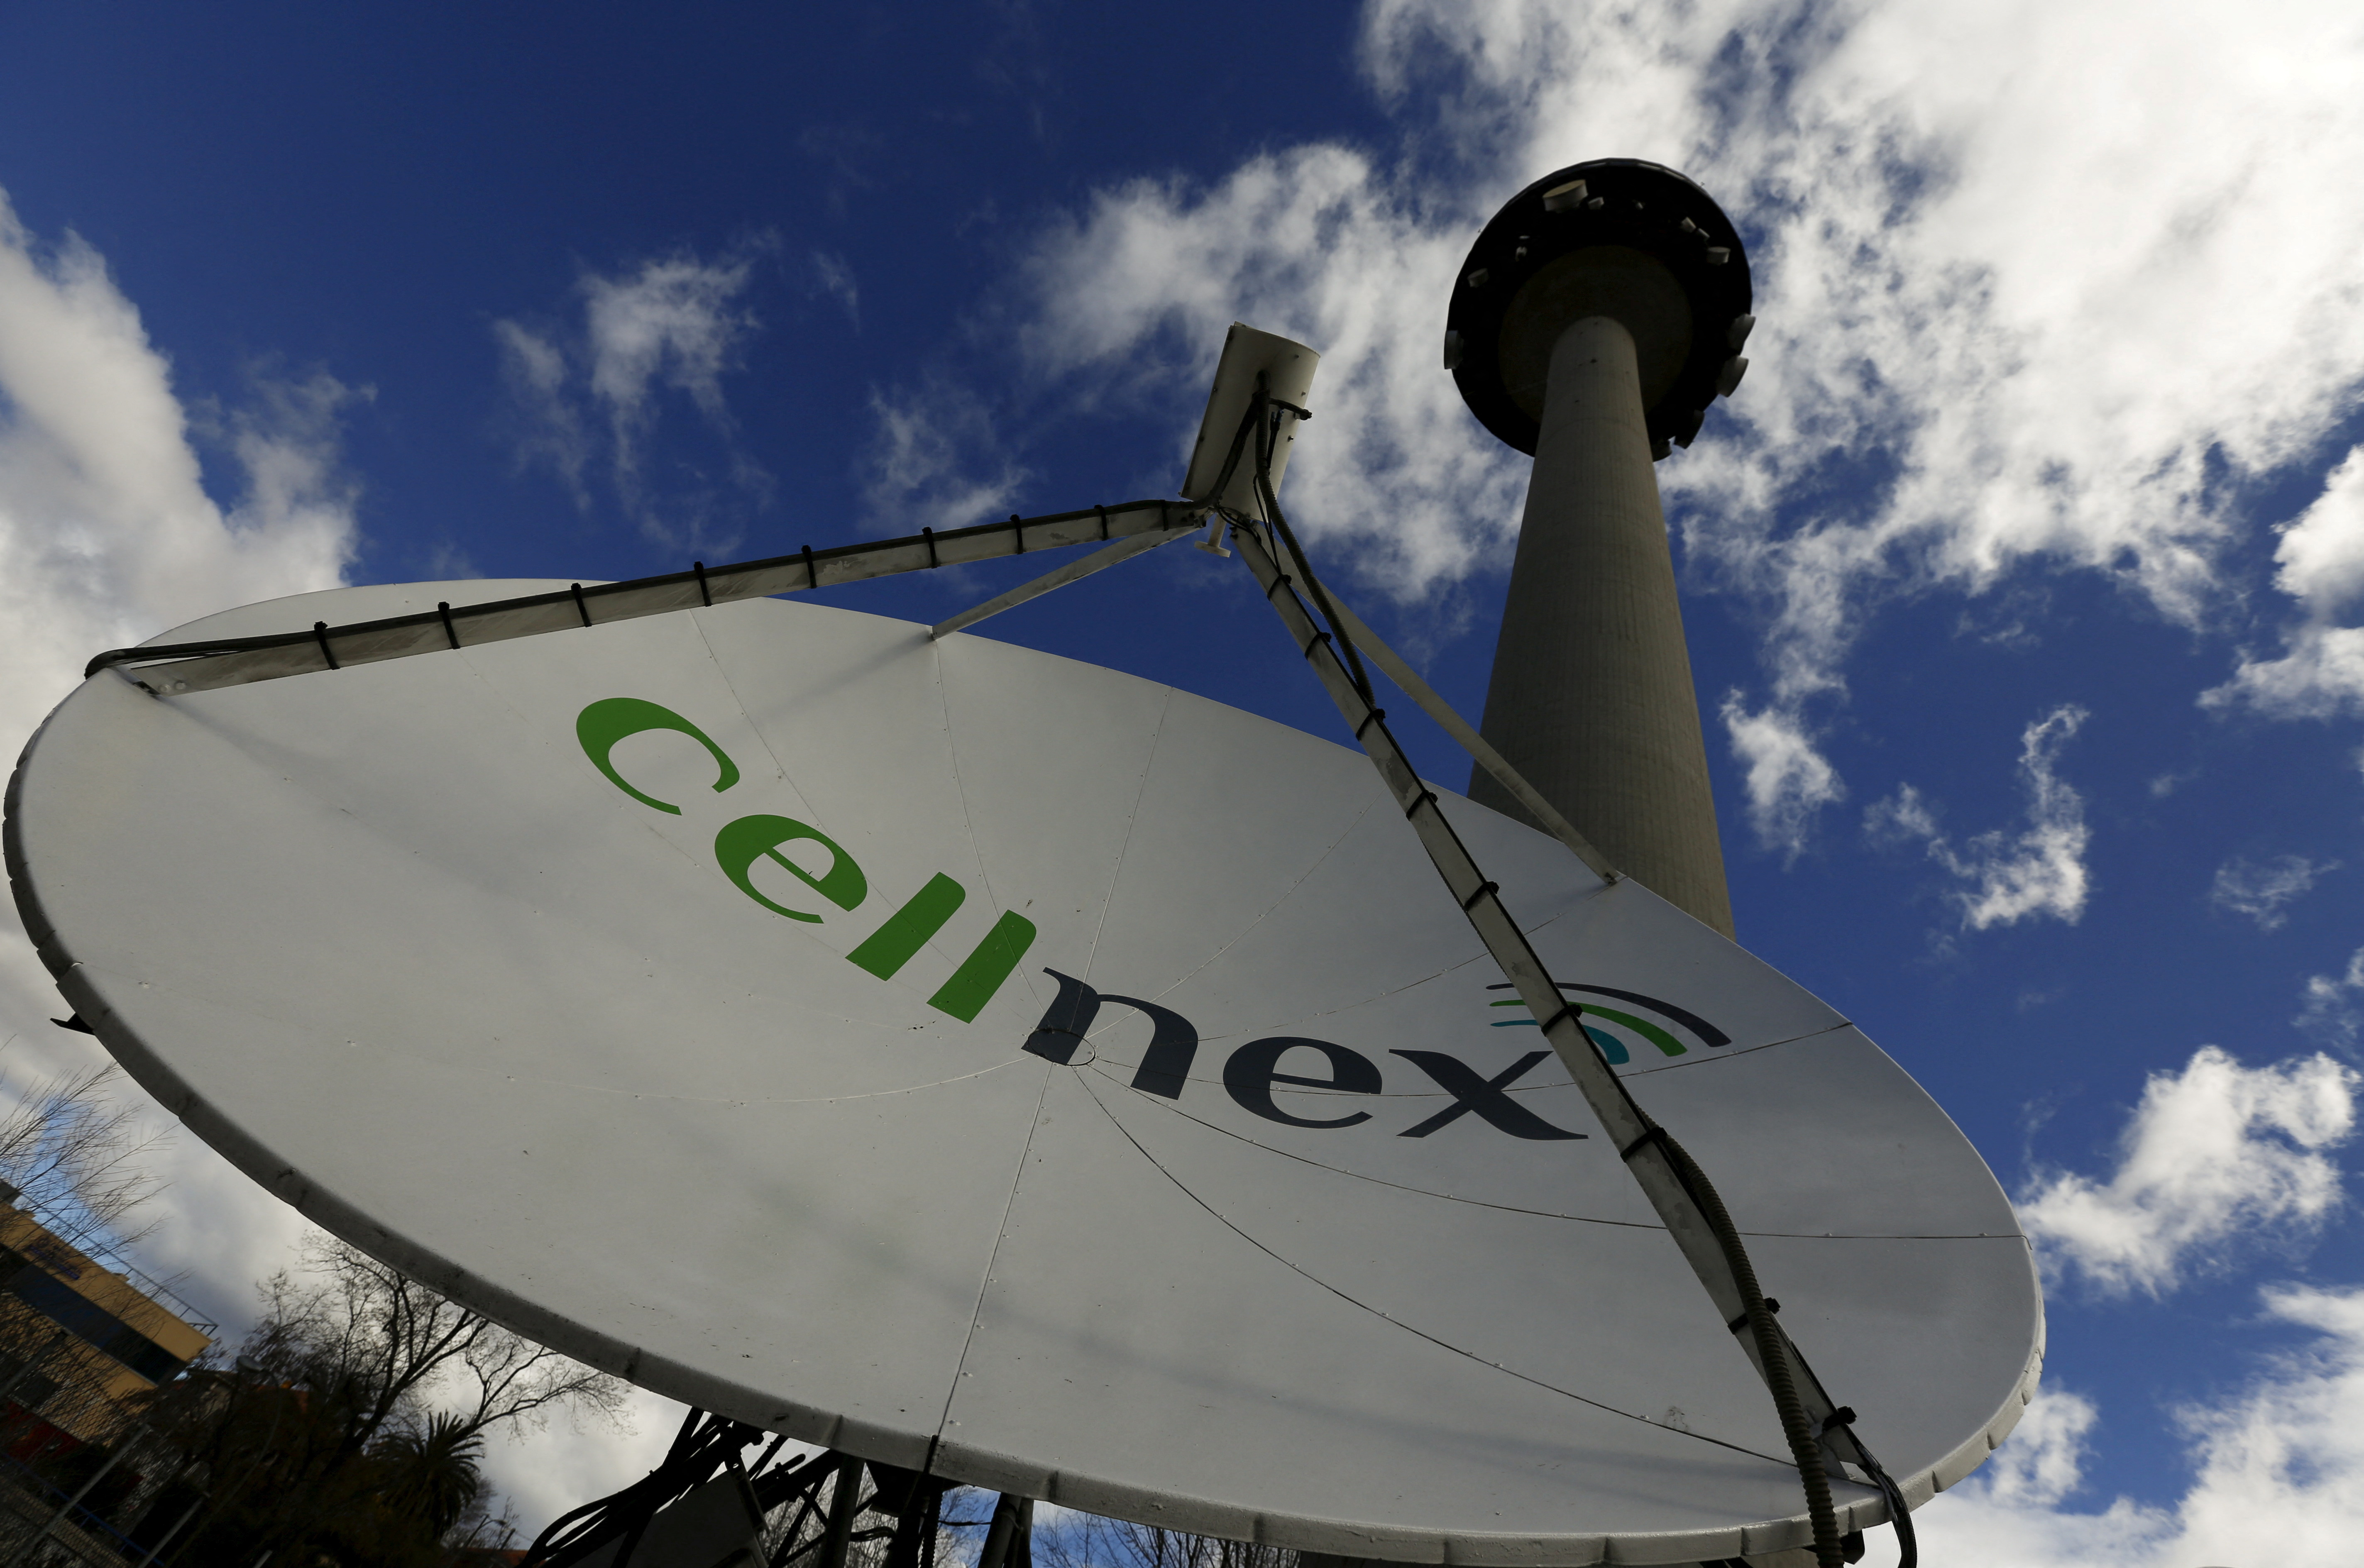 A telecom antenna of Spain's telecoms infrastructures firm Cellnex are seen under main telecom tower, known as 